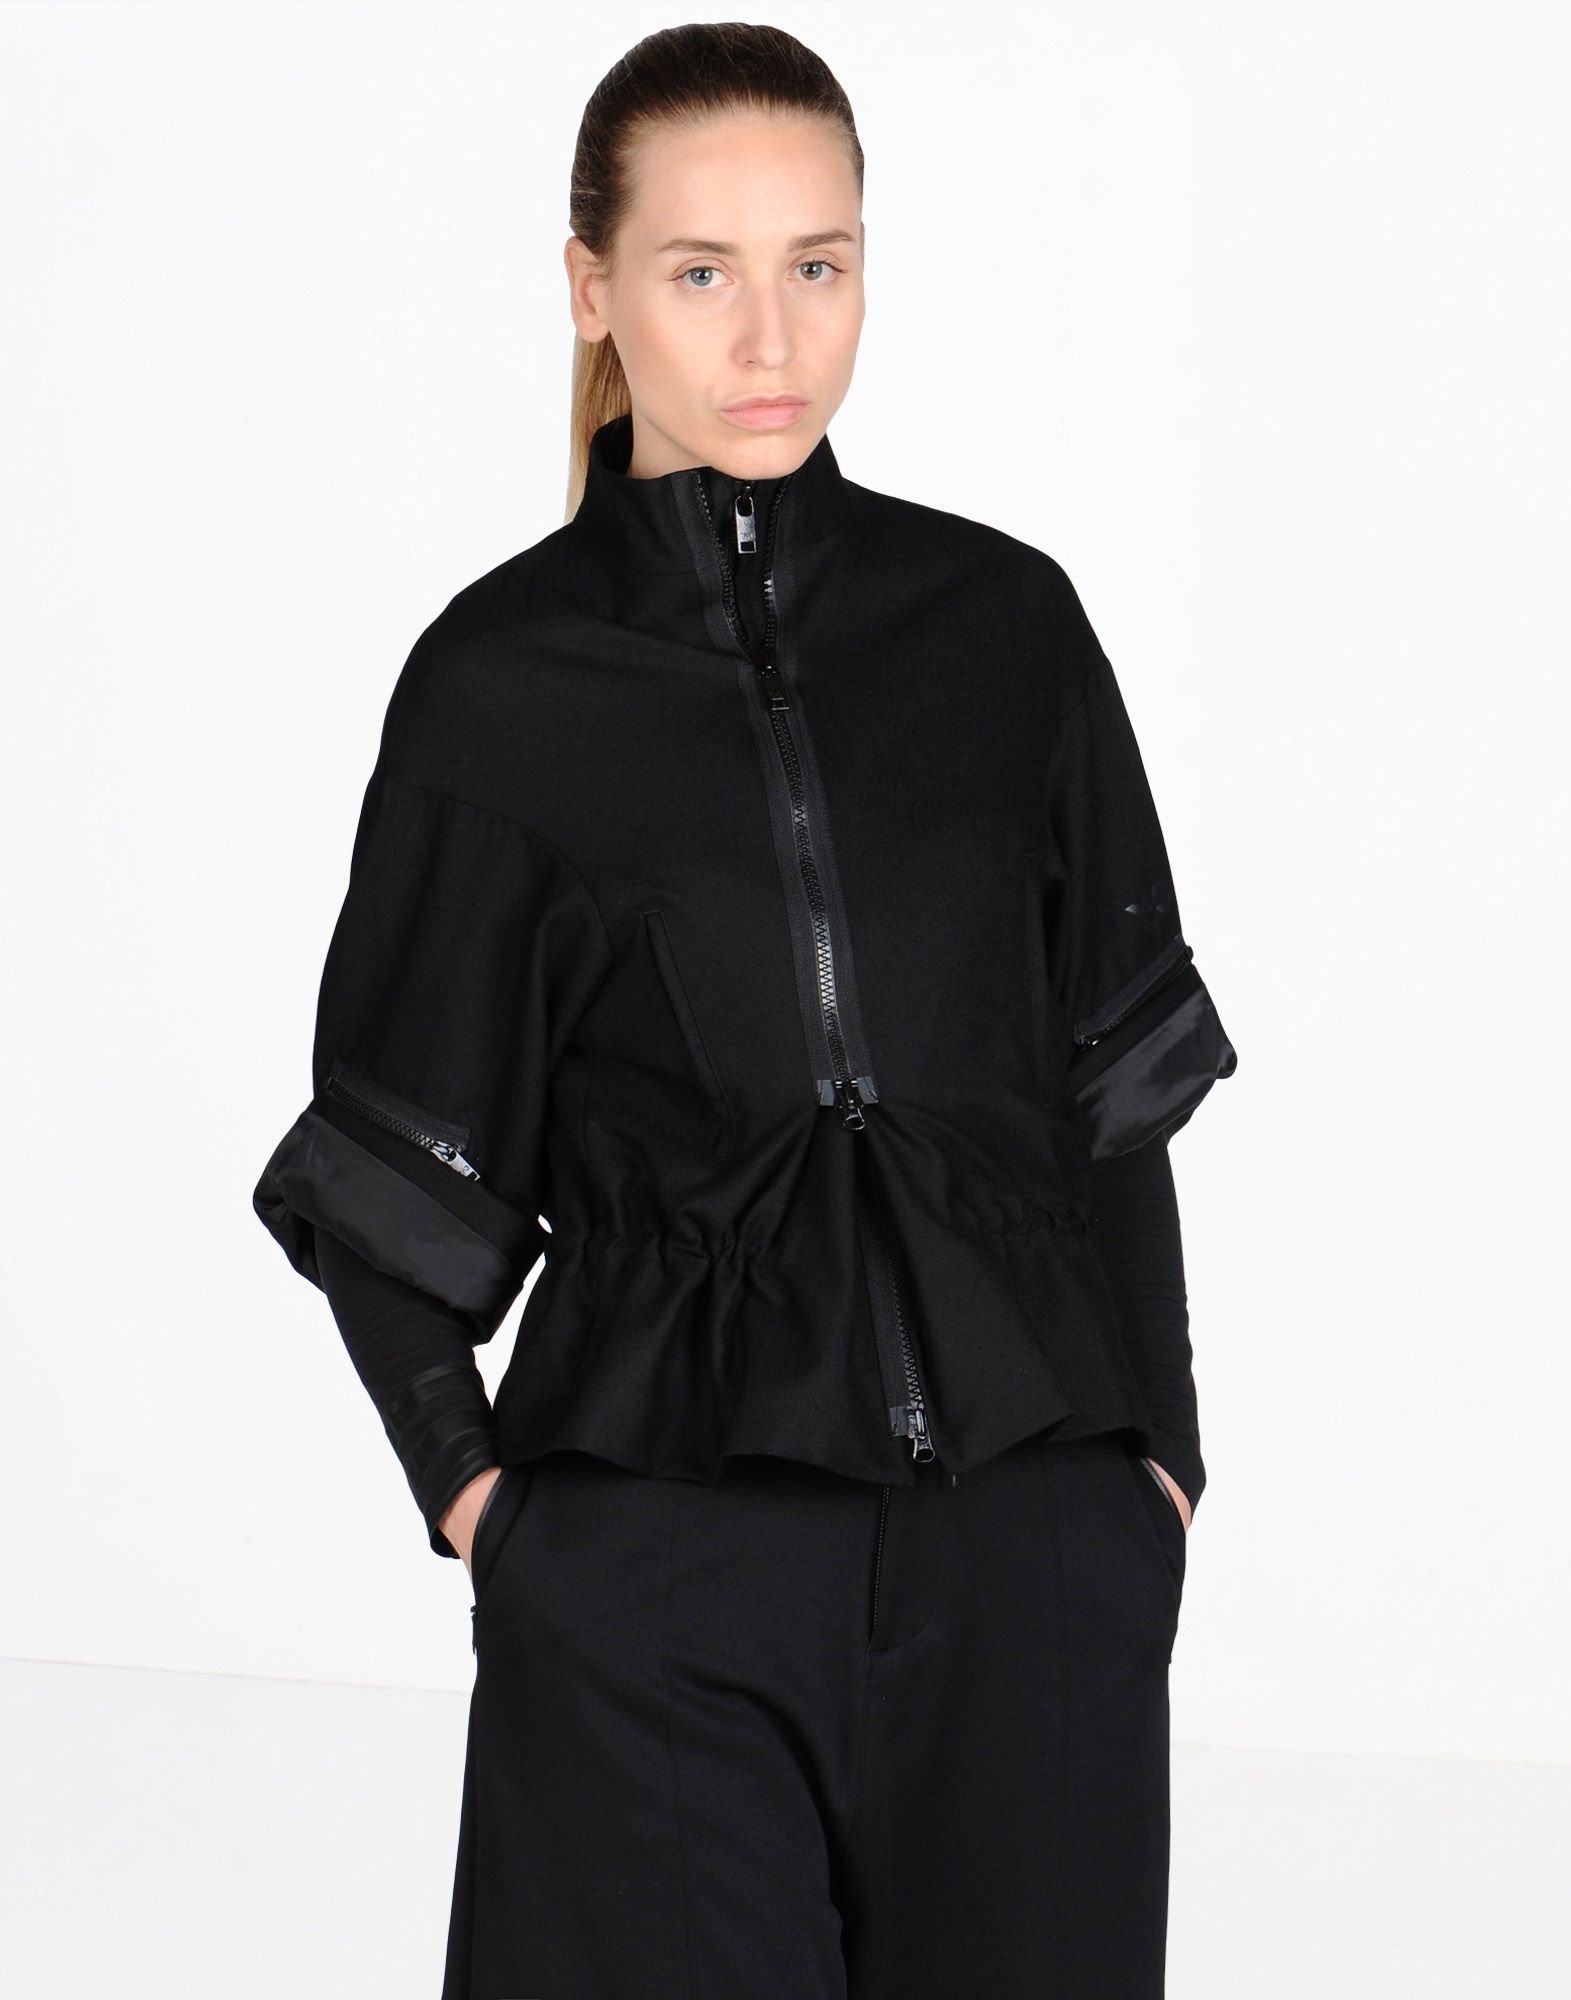 Y 3 INSULATOR JACKET for Women | Adidas Y-3 Official Store